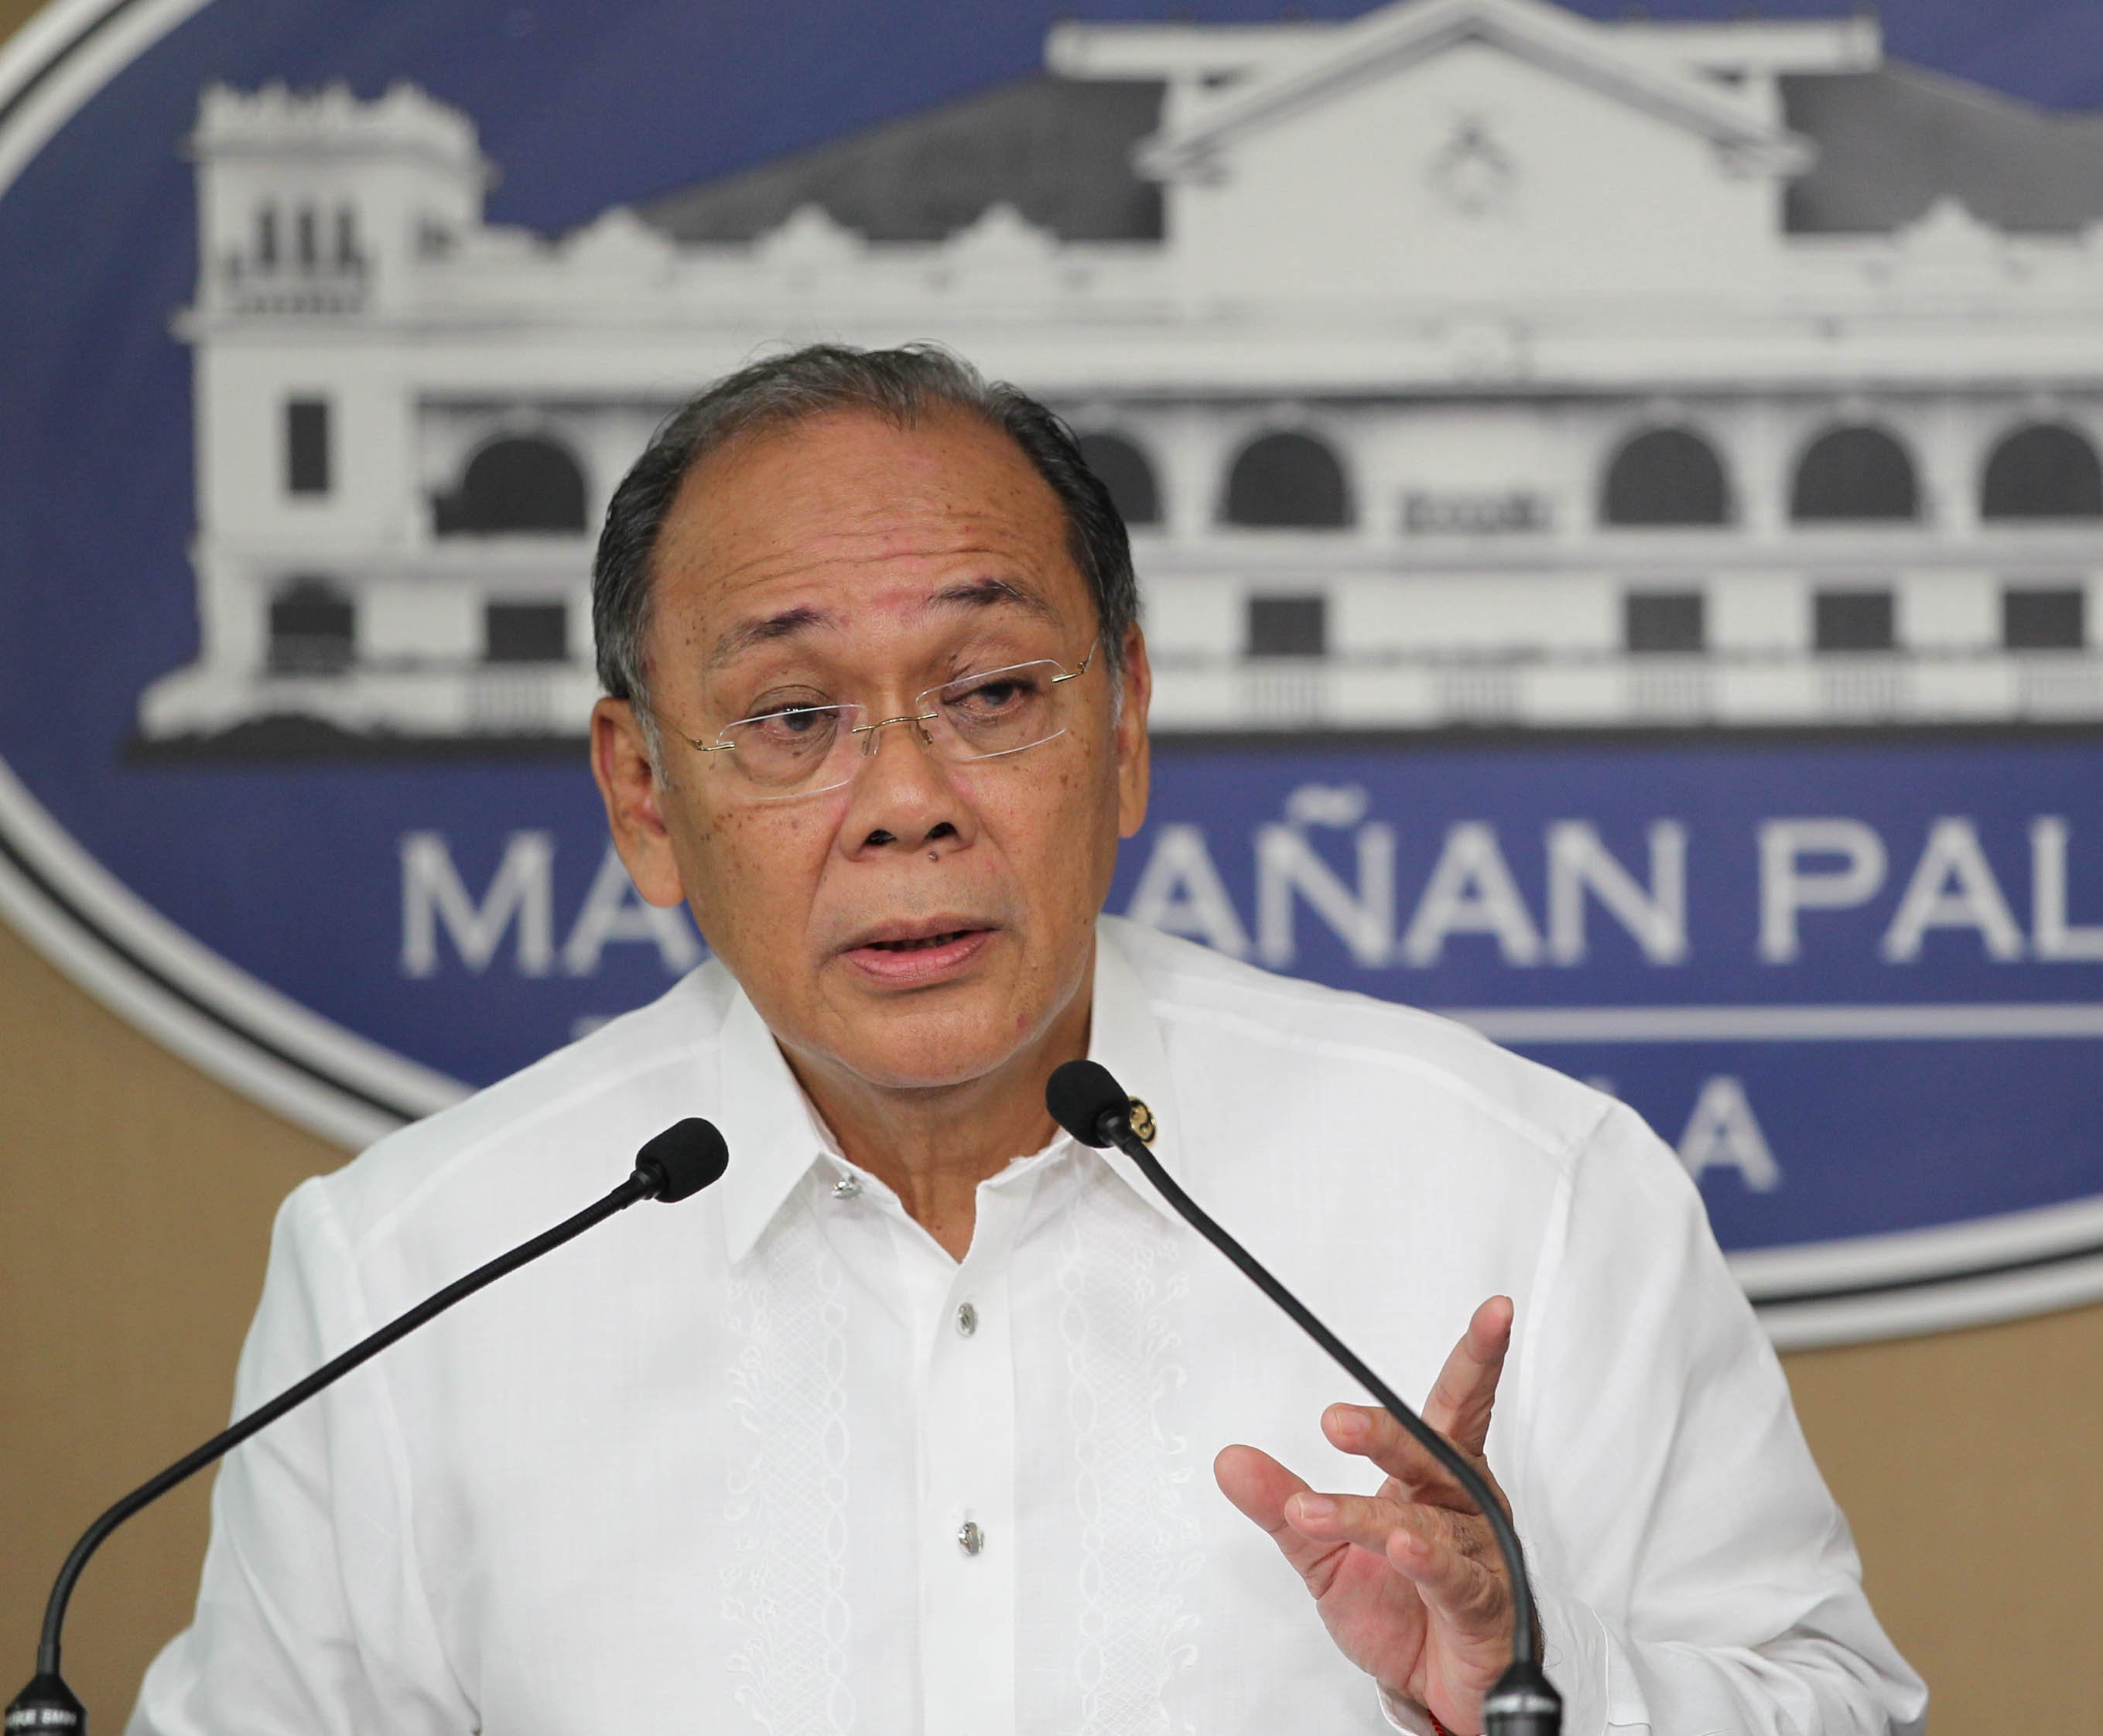 5 Chinese firms want to invest in PHL — Abella